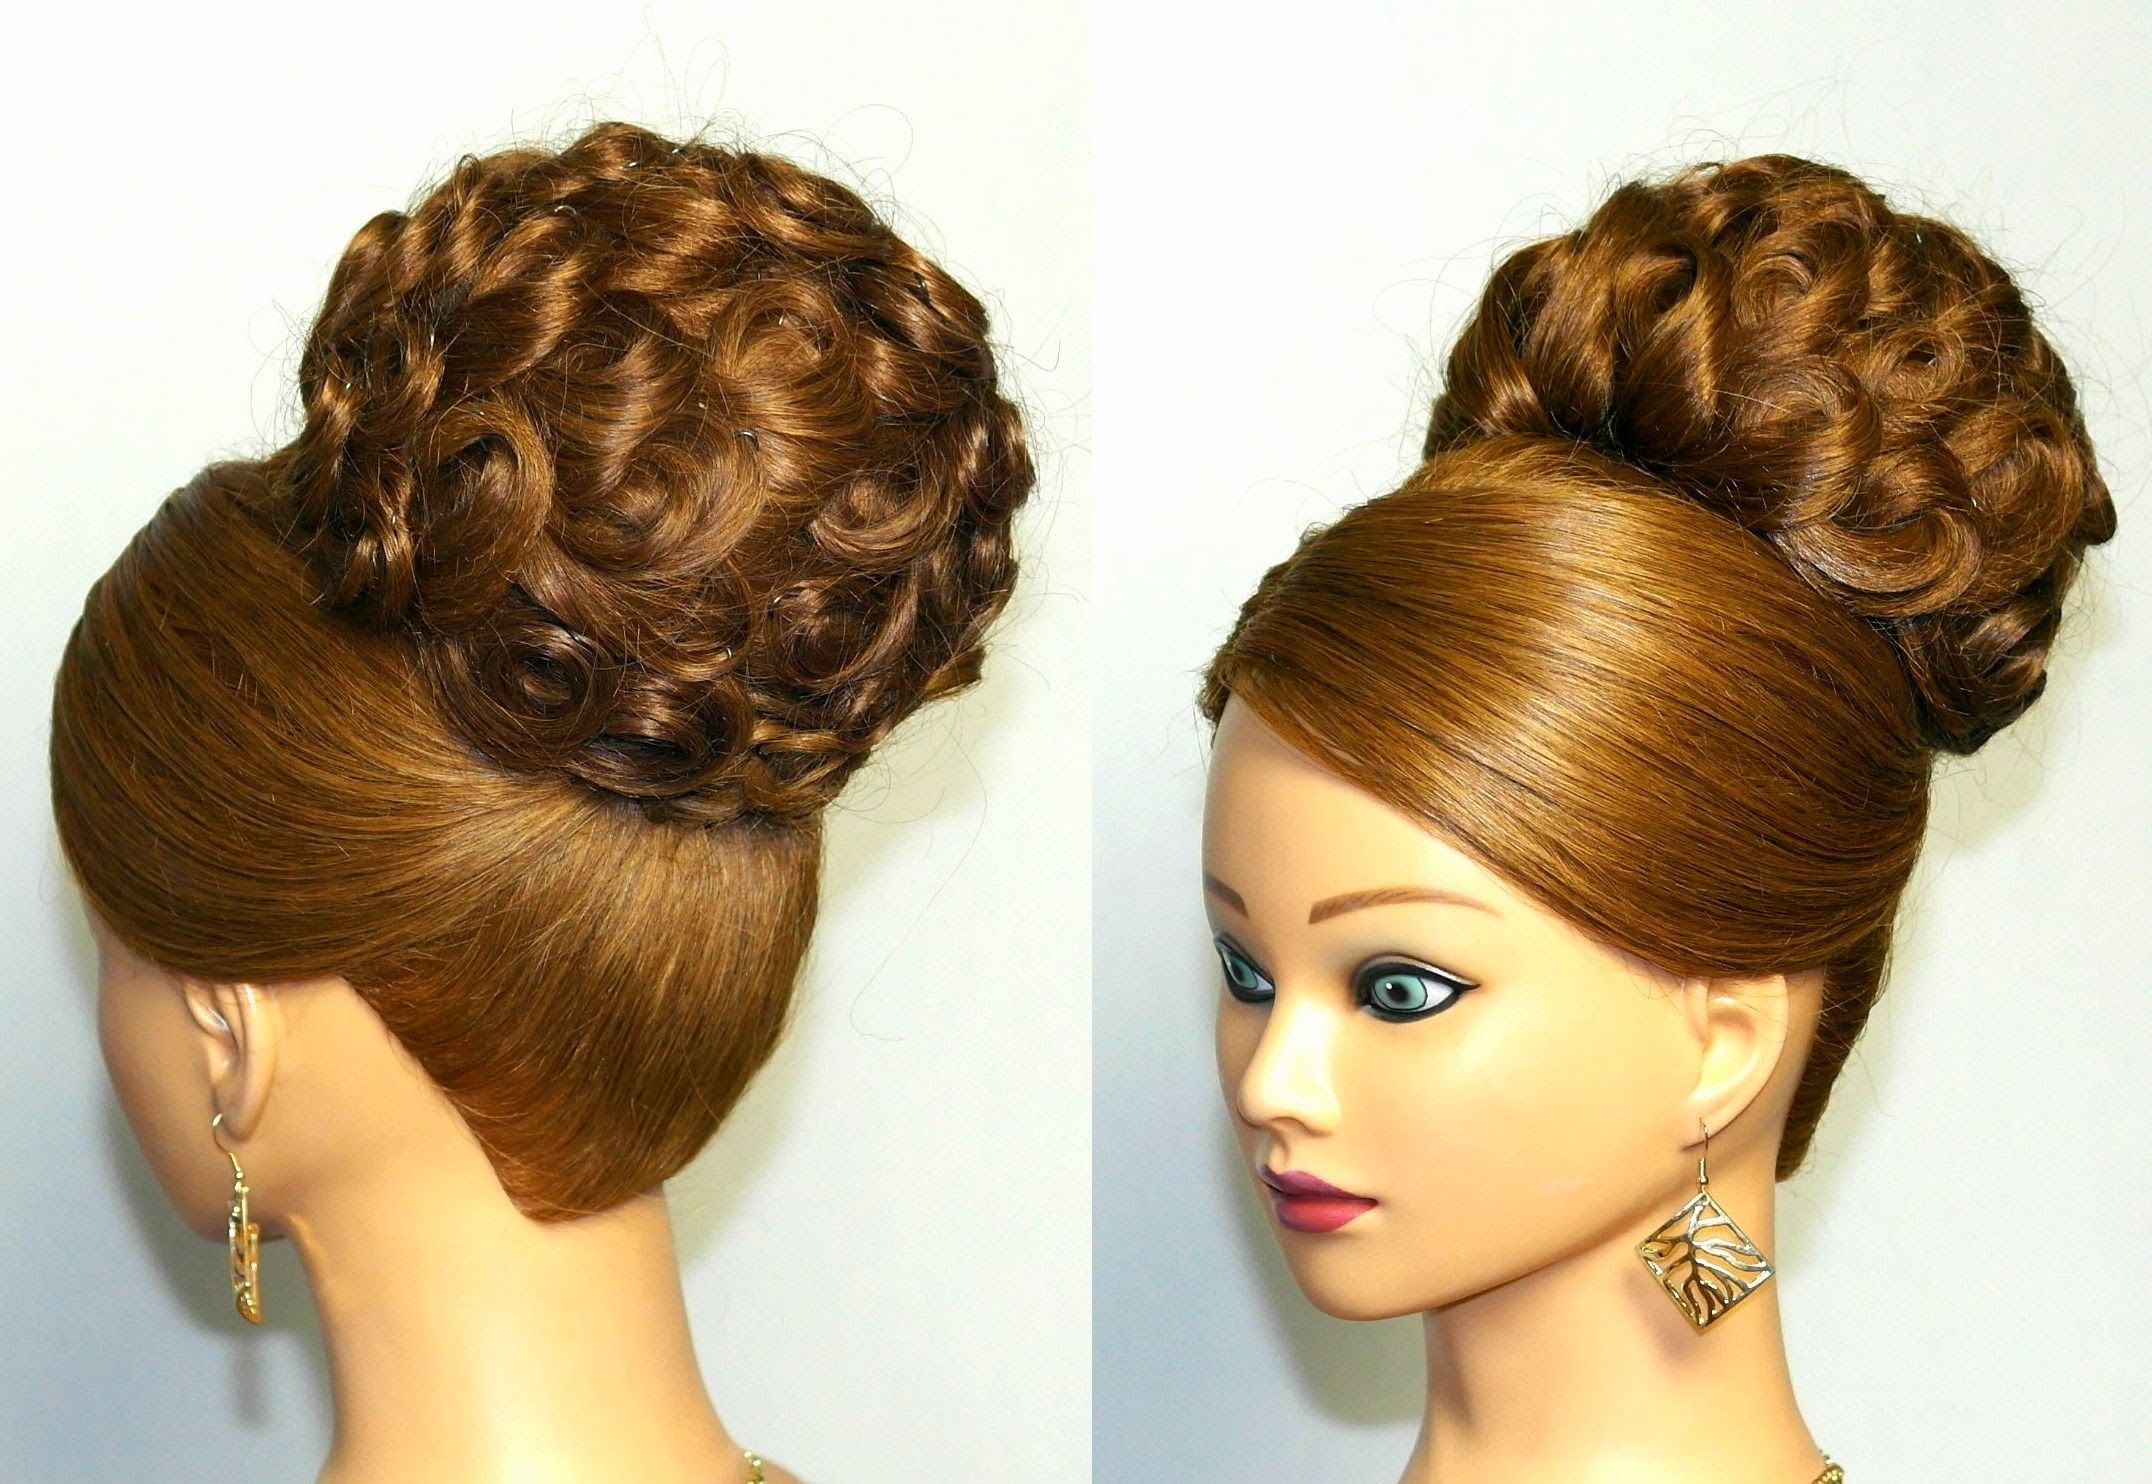 Elegant Wedding Updo Hairstyle For Long Hair Hair Brilliant Ideas Of With Wedding Updos For Long Hair (View 15 of 15)